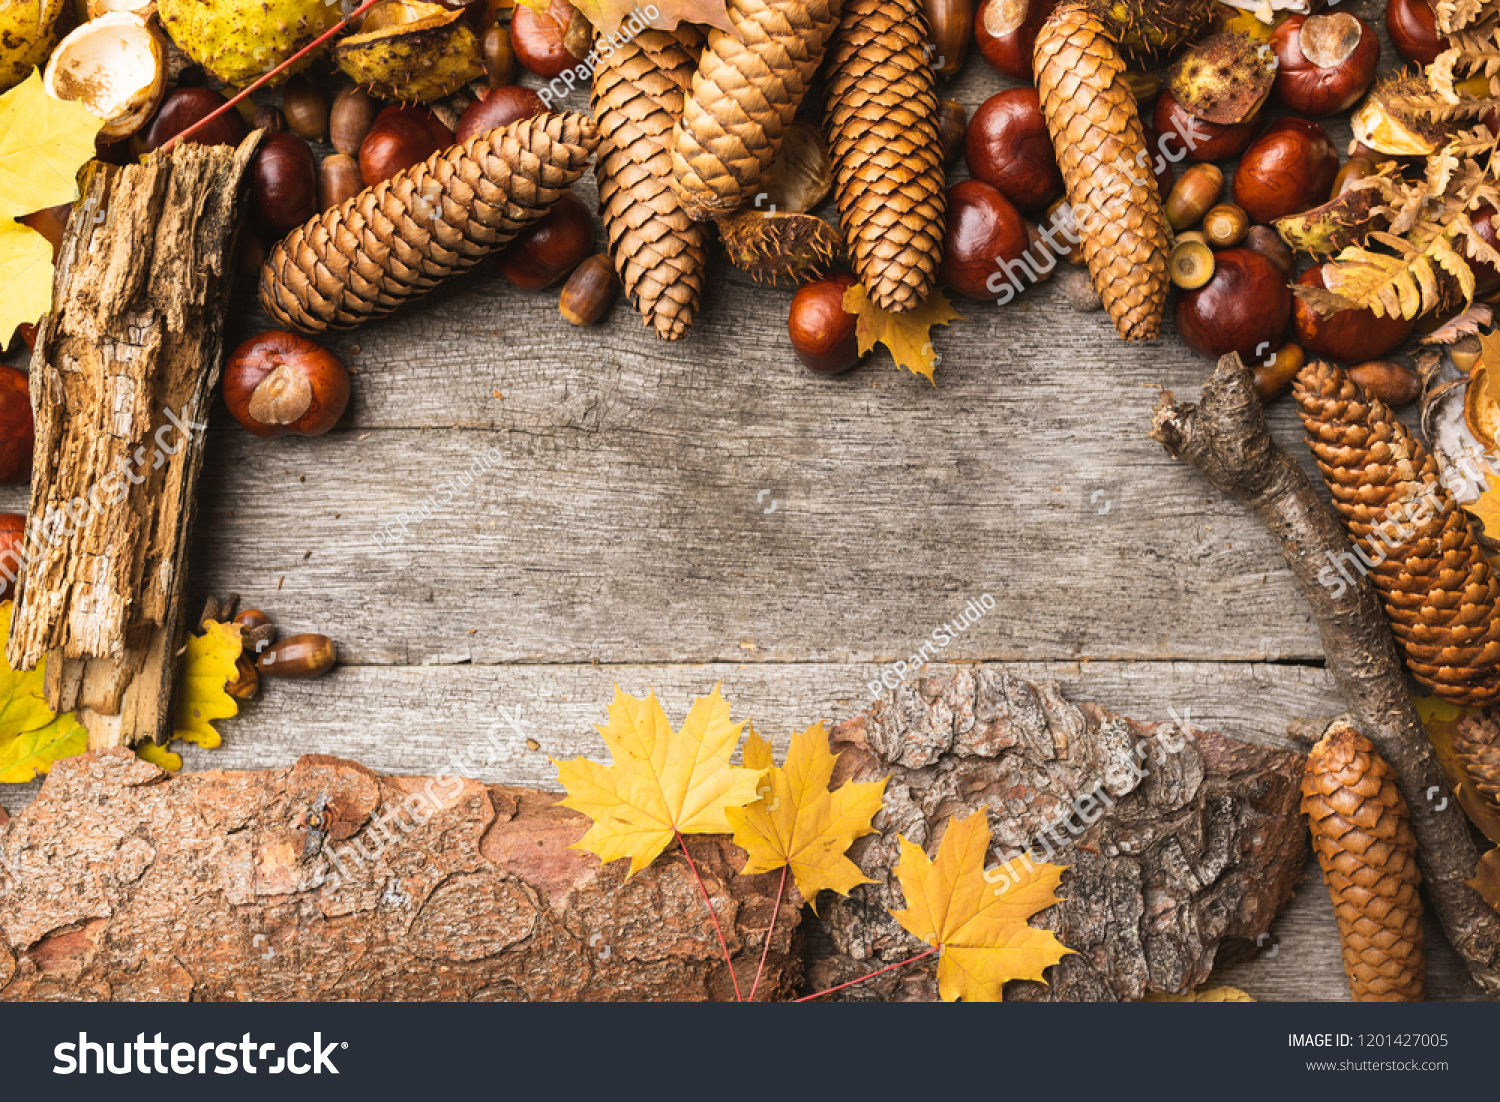 Autumn arrangement, concept still life with chestnuts, cones, acorns, leaves, bark on wooden background. Seasonal frame from autumn harvest. Flat-lay visualization with copy space. Table top view. #1201427005